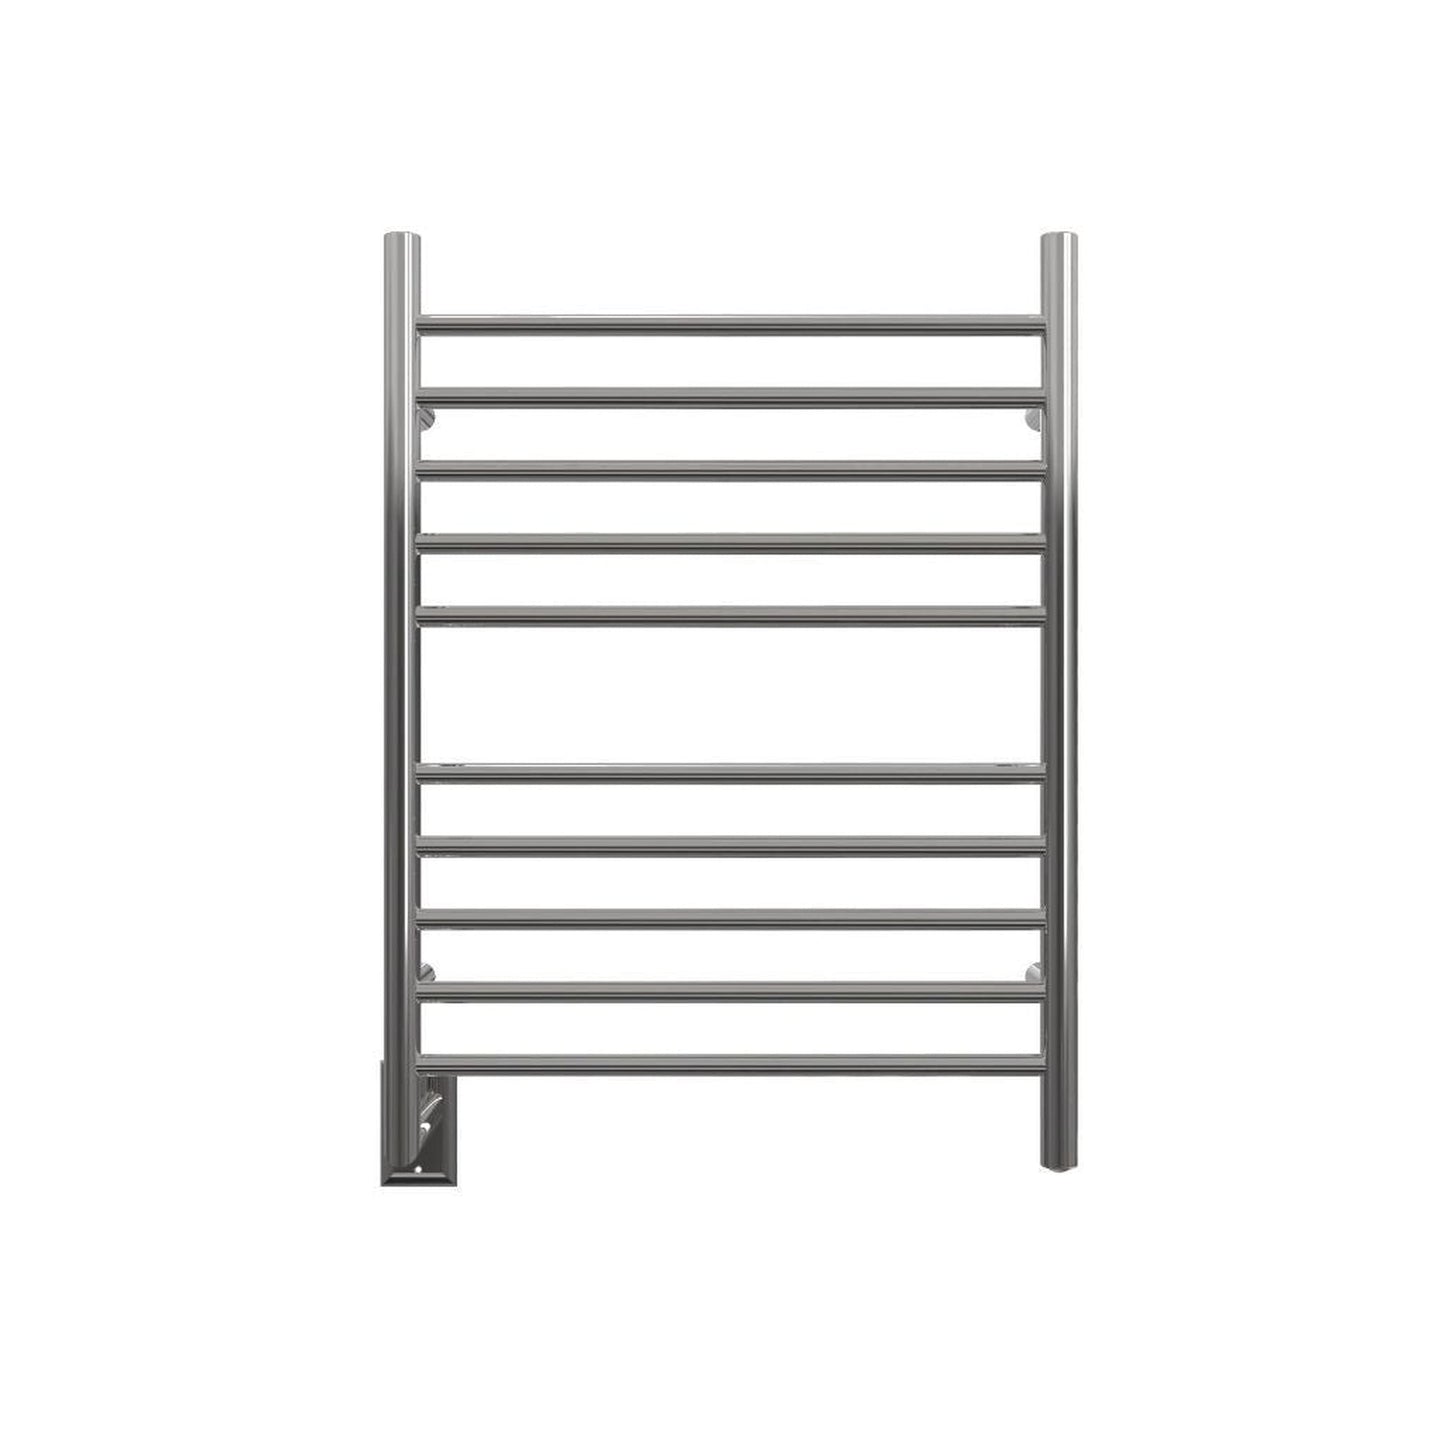 Amba Radiant Straight 10-Bar Polished Stainless Steel Left Hardwired Towel Warmer